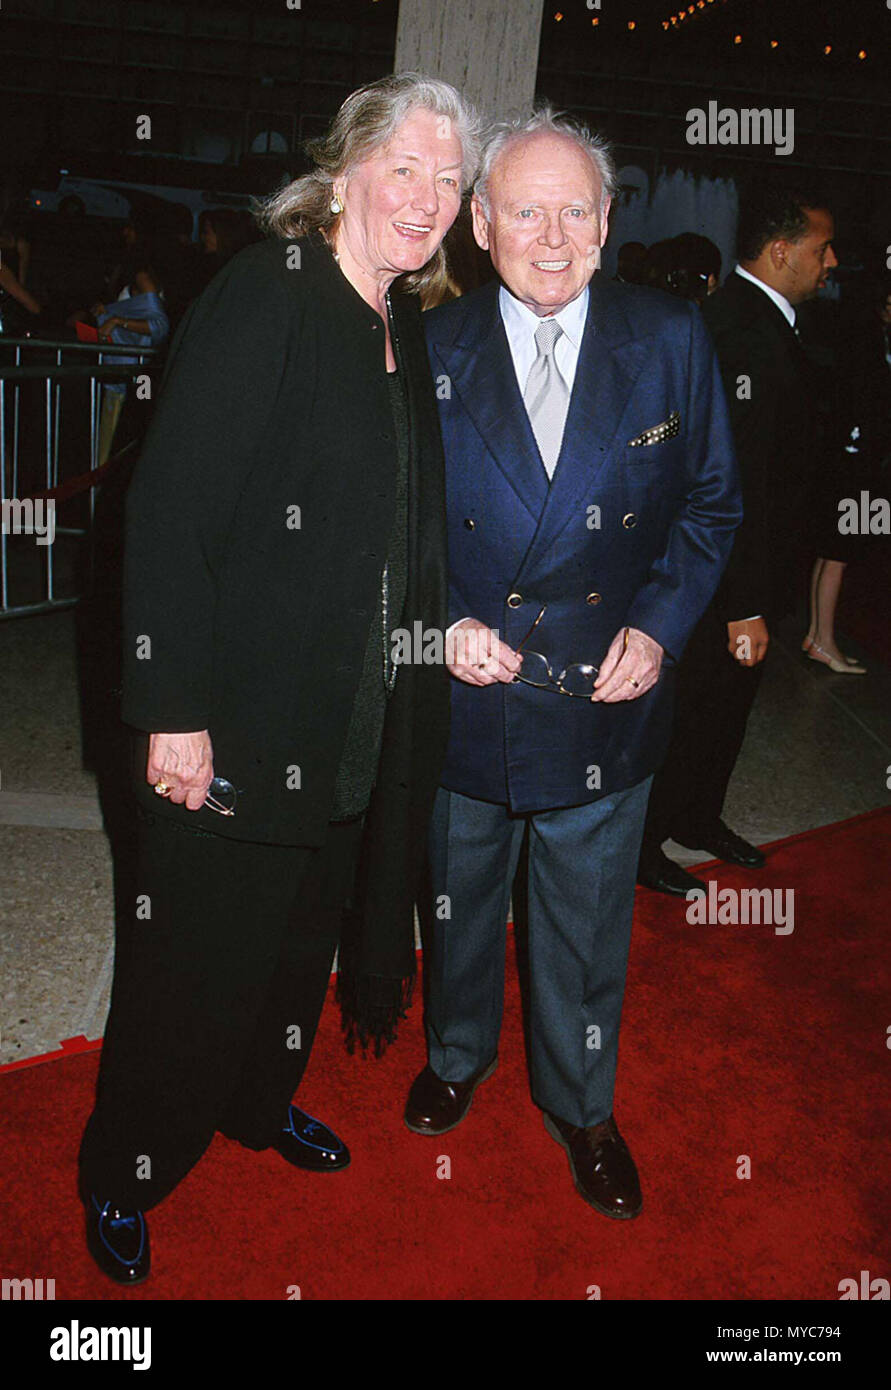 03 Apr 2000, Los Angeles, California, USA --- Carroll O'Connor with Wife Nancy Fields --- Image by © MichelB / USACarroll O'Connor with Wife Nancy Fields Red Carpet Event, Vertical, USA, Film Industry, Celebrities,  Photography, Bestof, Arts Culture and Entertainment, Topix Celebrities fashion /  Vertical, Best of, Event in Hollywood Life - California,  Red Carpet and backstage, USA, Film Industry, Celebrities,  movie celebrities, TV celebrities, Music celebrities, Photography, Bestof, Arts Culture and Entertainment,  Topix,  vertical,, inquiry tsuni@Gamma-USA.com,   celebrity with family memb Stock Photo